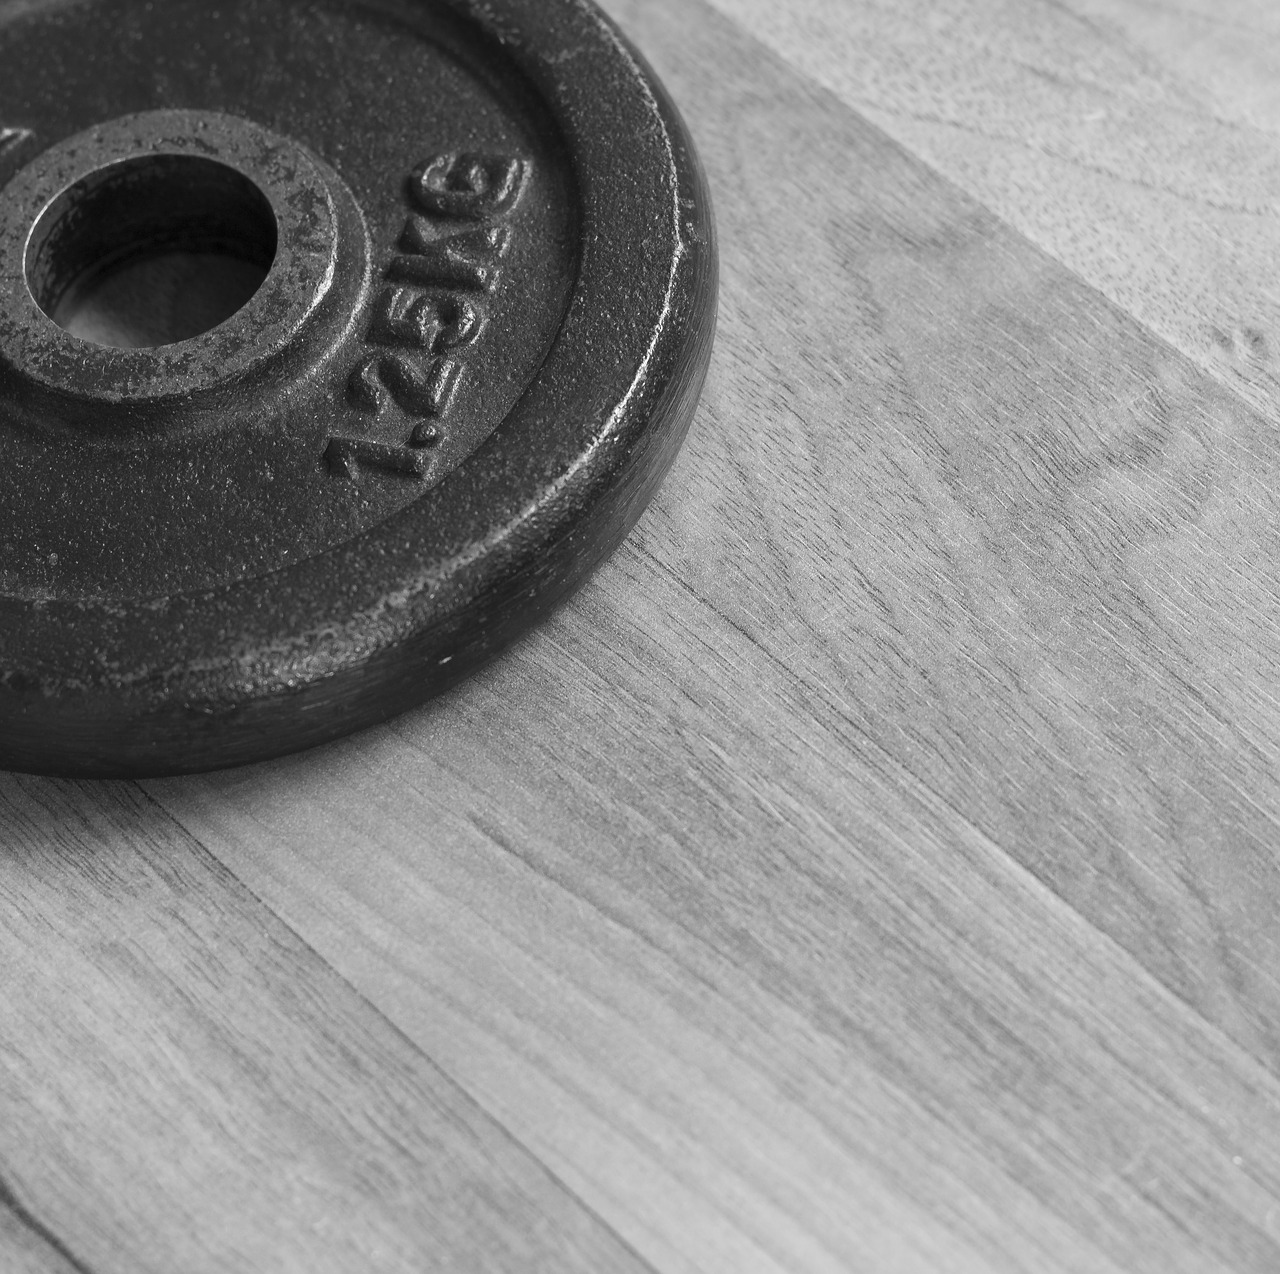 dumbbell fitness studio weights free photo